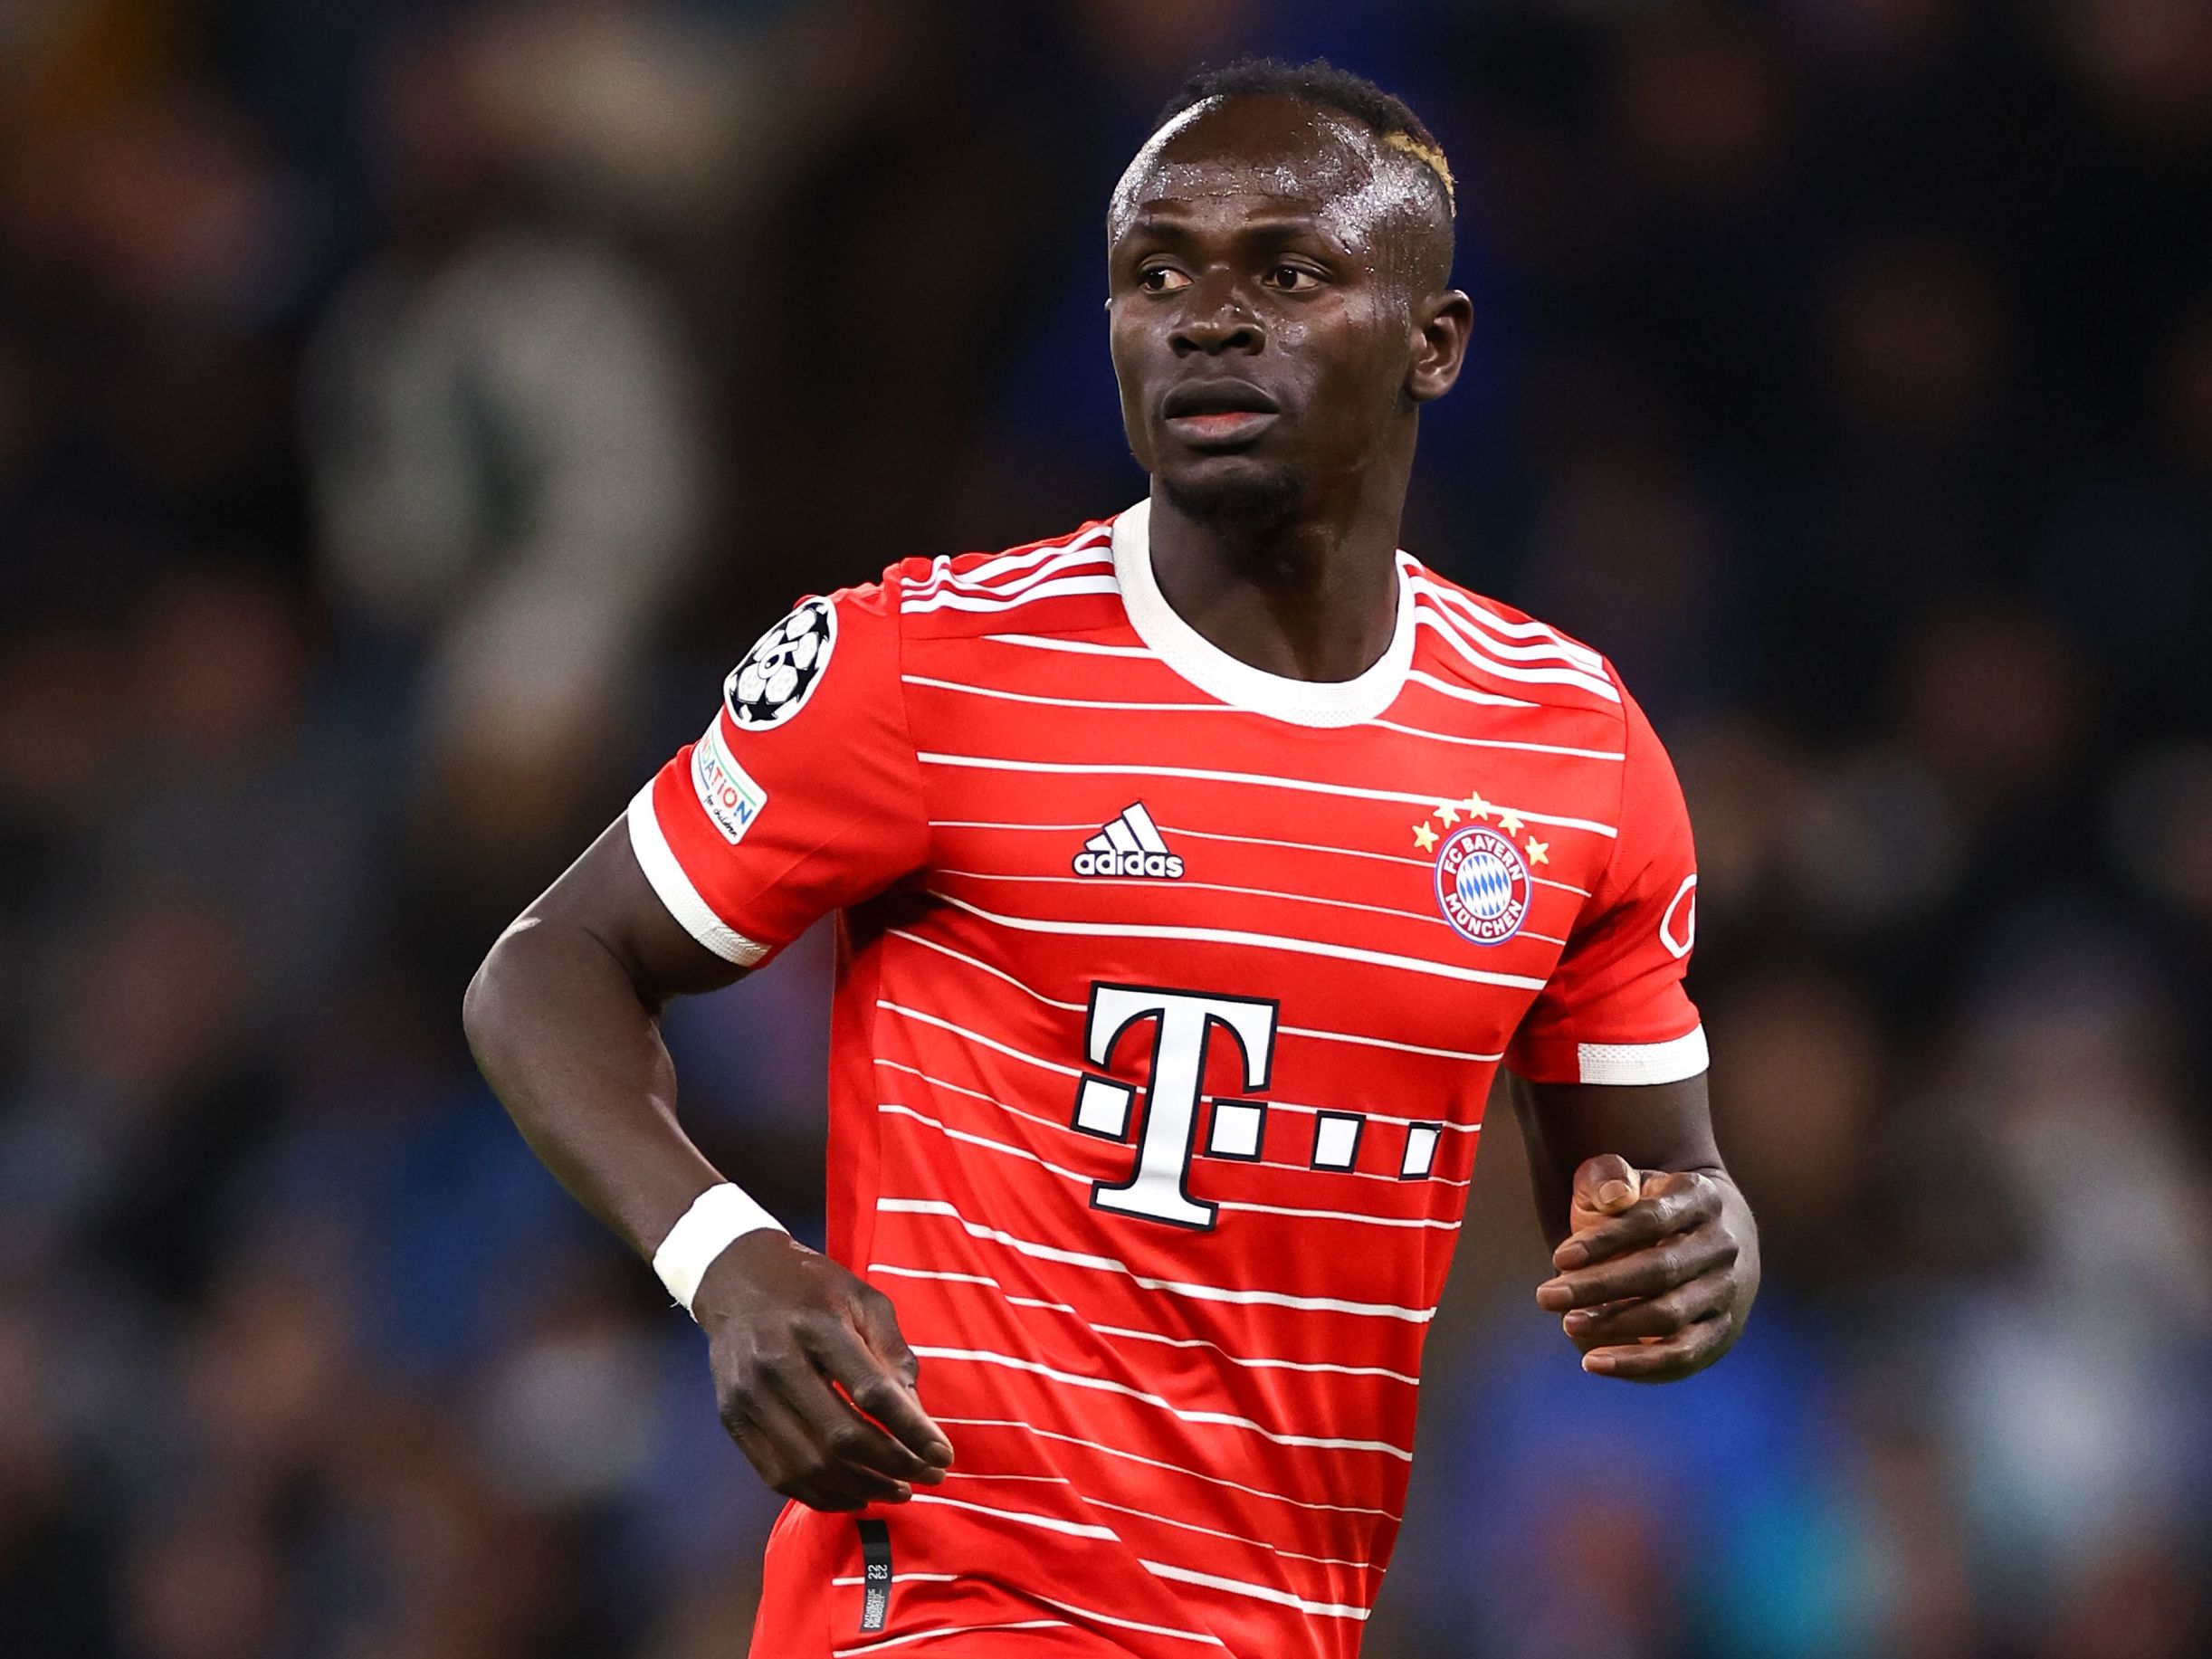 Sadio Mané removed from Bayern Munich squad for one match after 'misconduct' following Champions League defeat